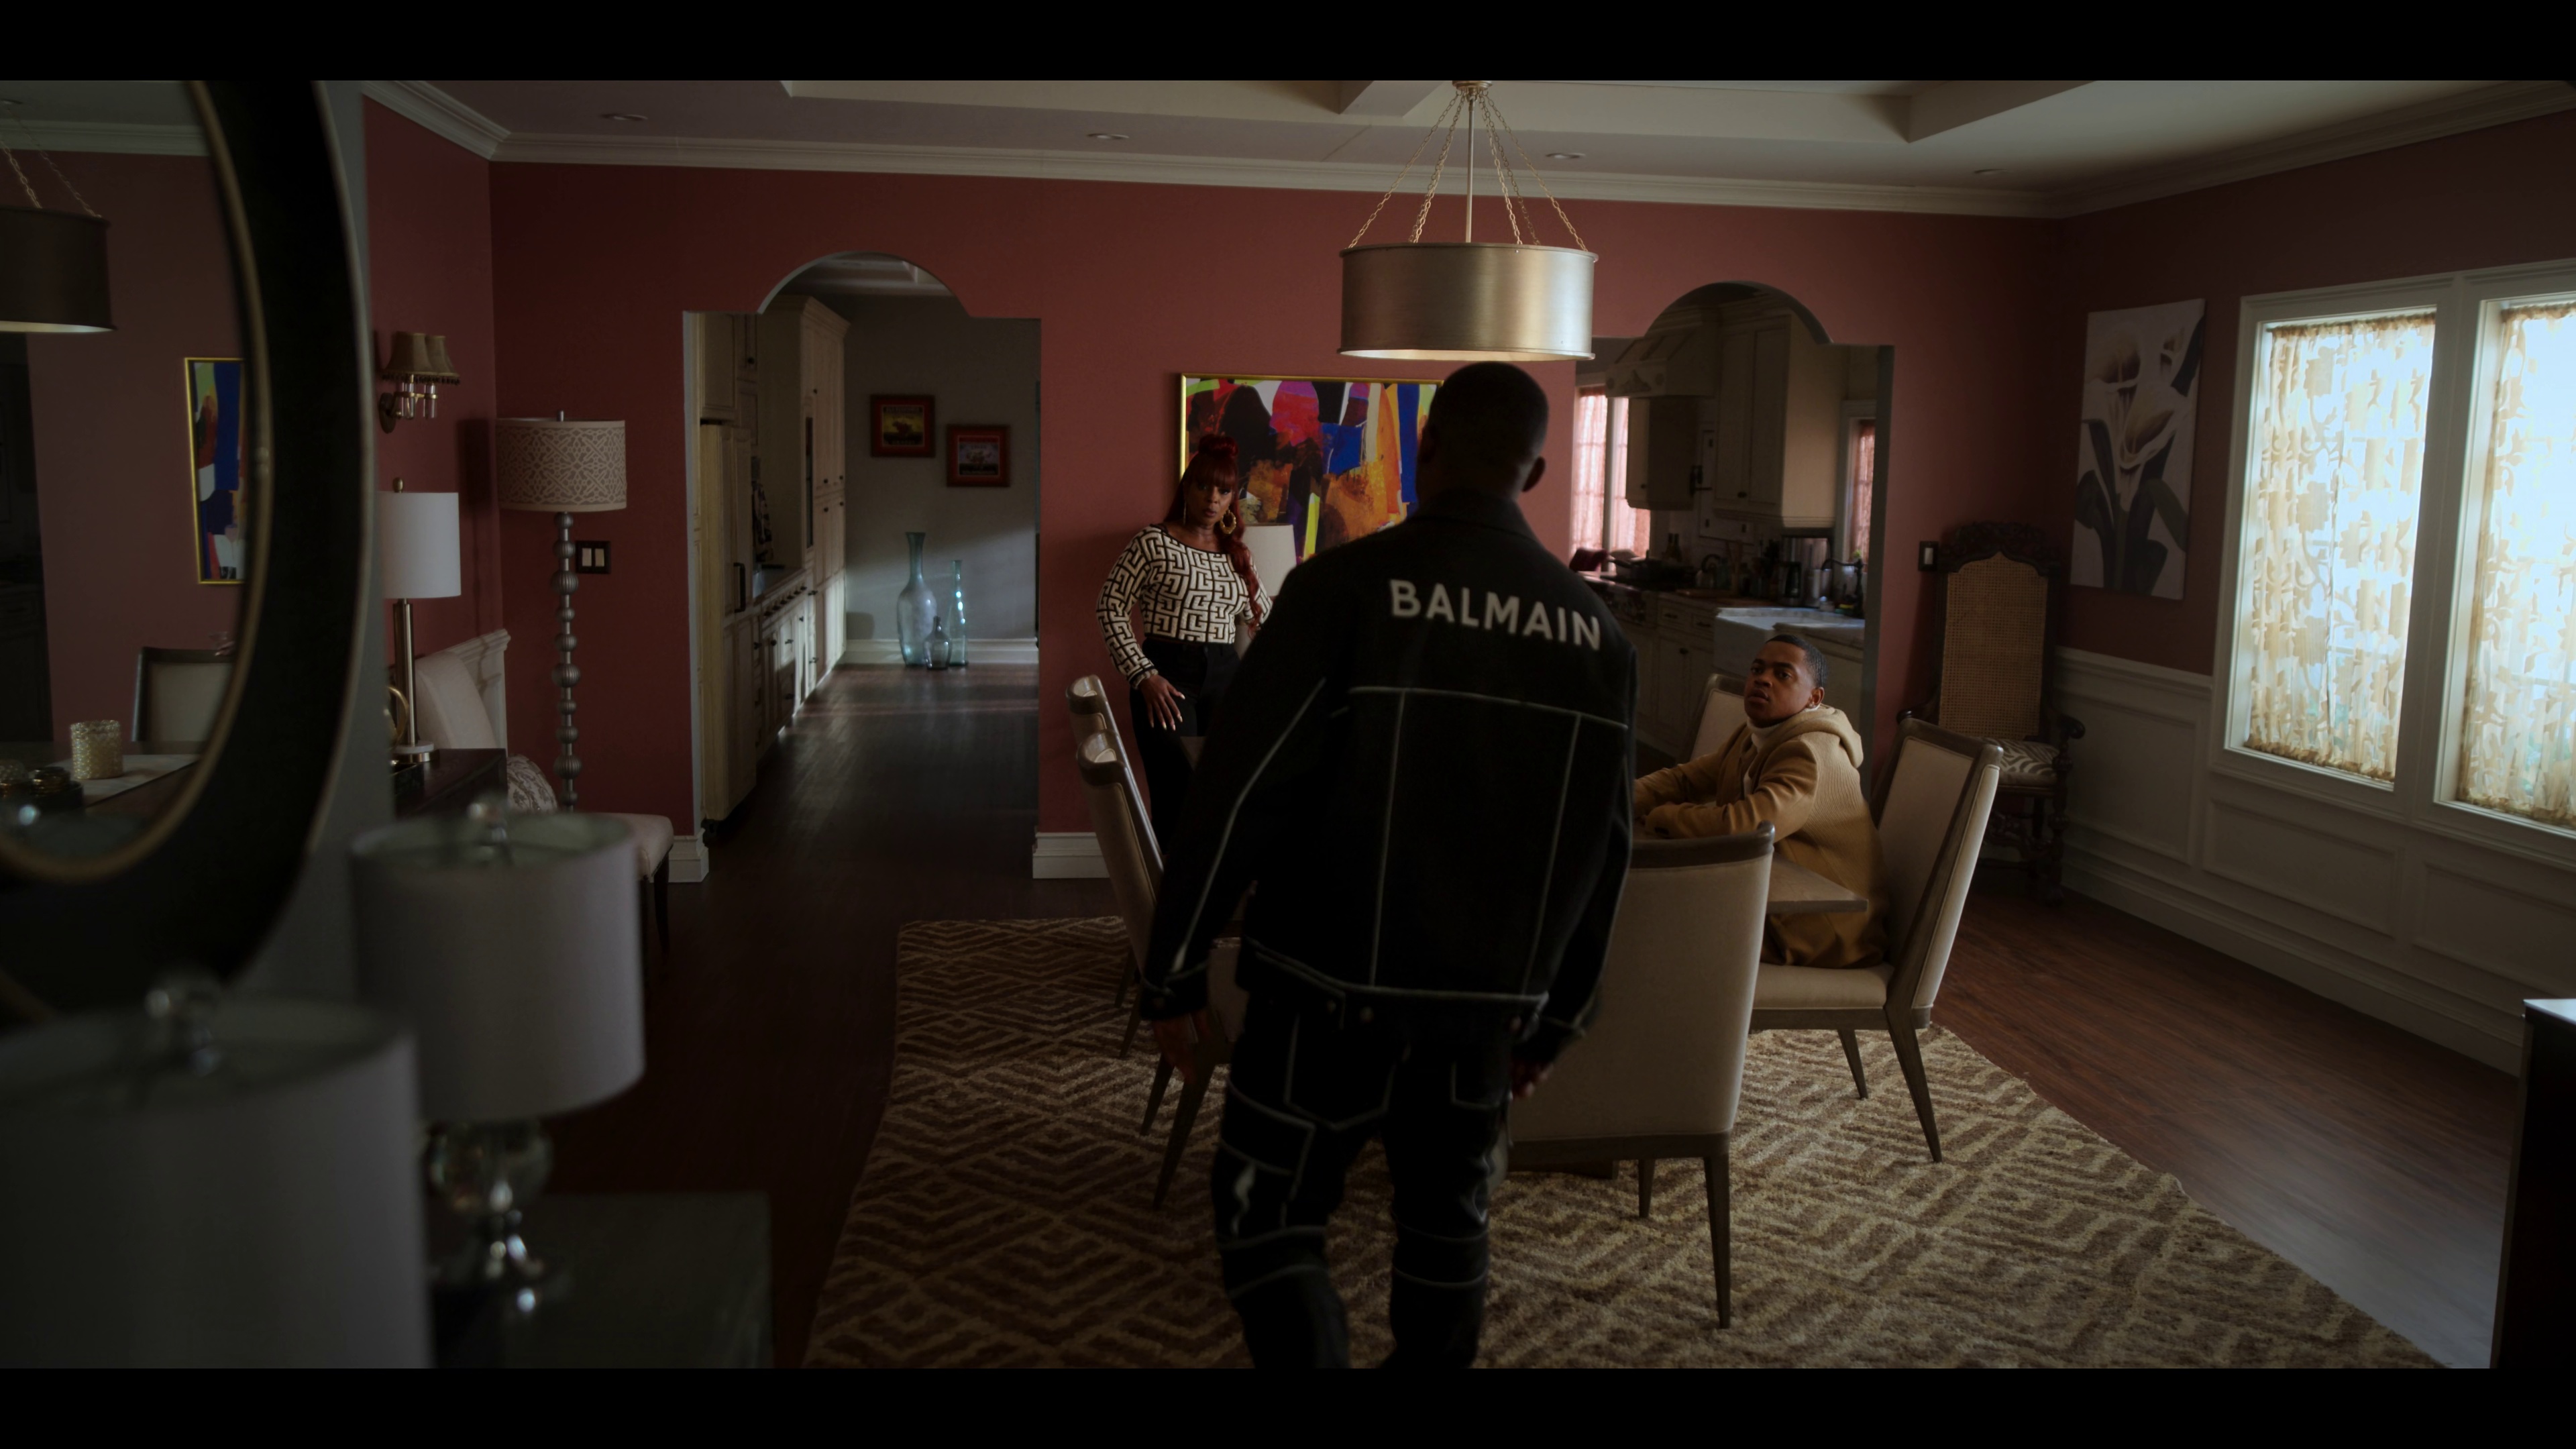 Givenchy Zip Hoodie Jacket worn by Cane Tejada (Woody McClain) as